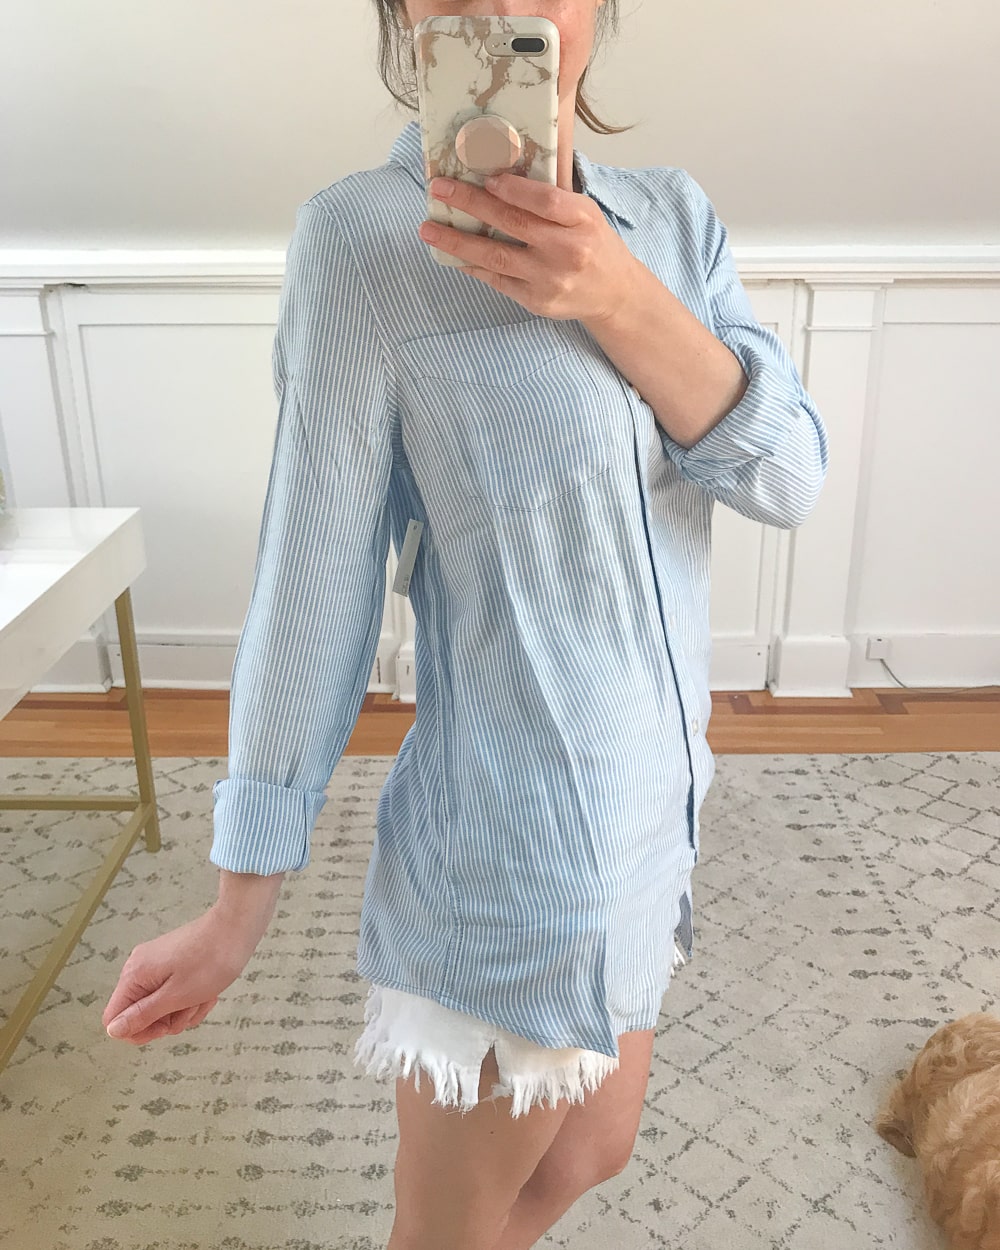 Amazon Long-Sleeve Button-Front Tunic tried on by affordable fashion blogger Stephanie Ziajka on Diary of a Debutante